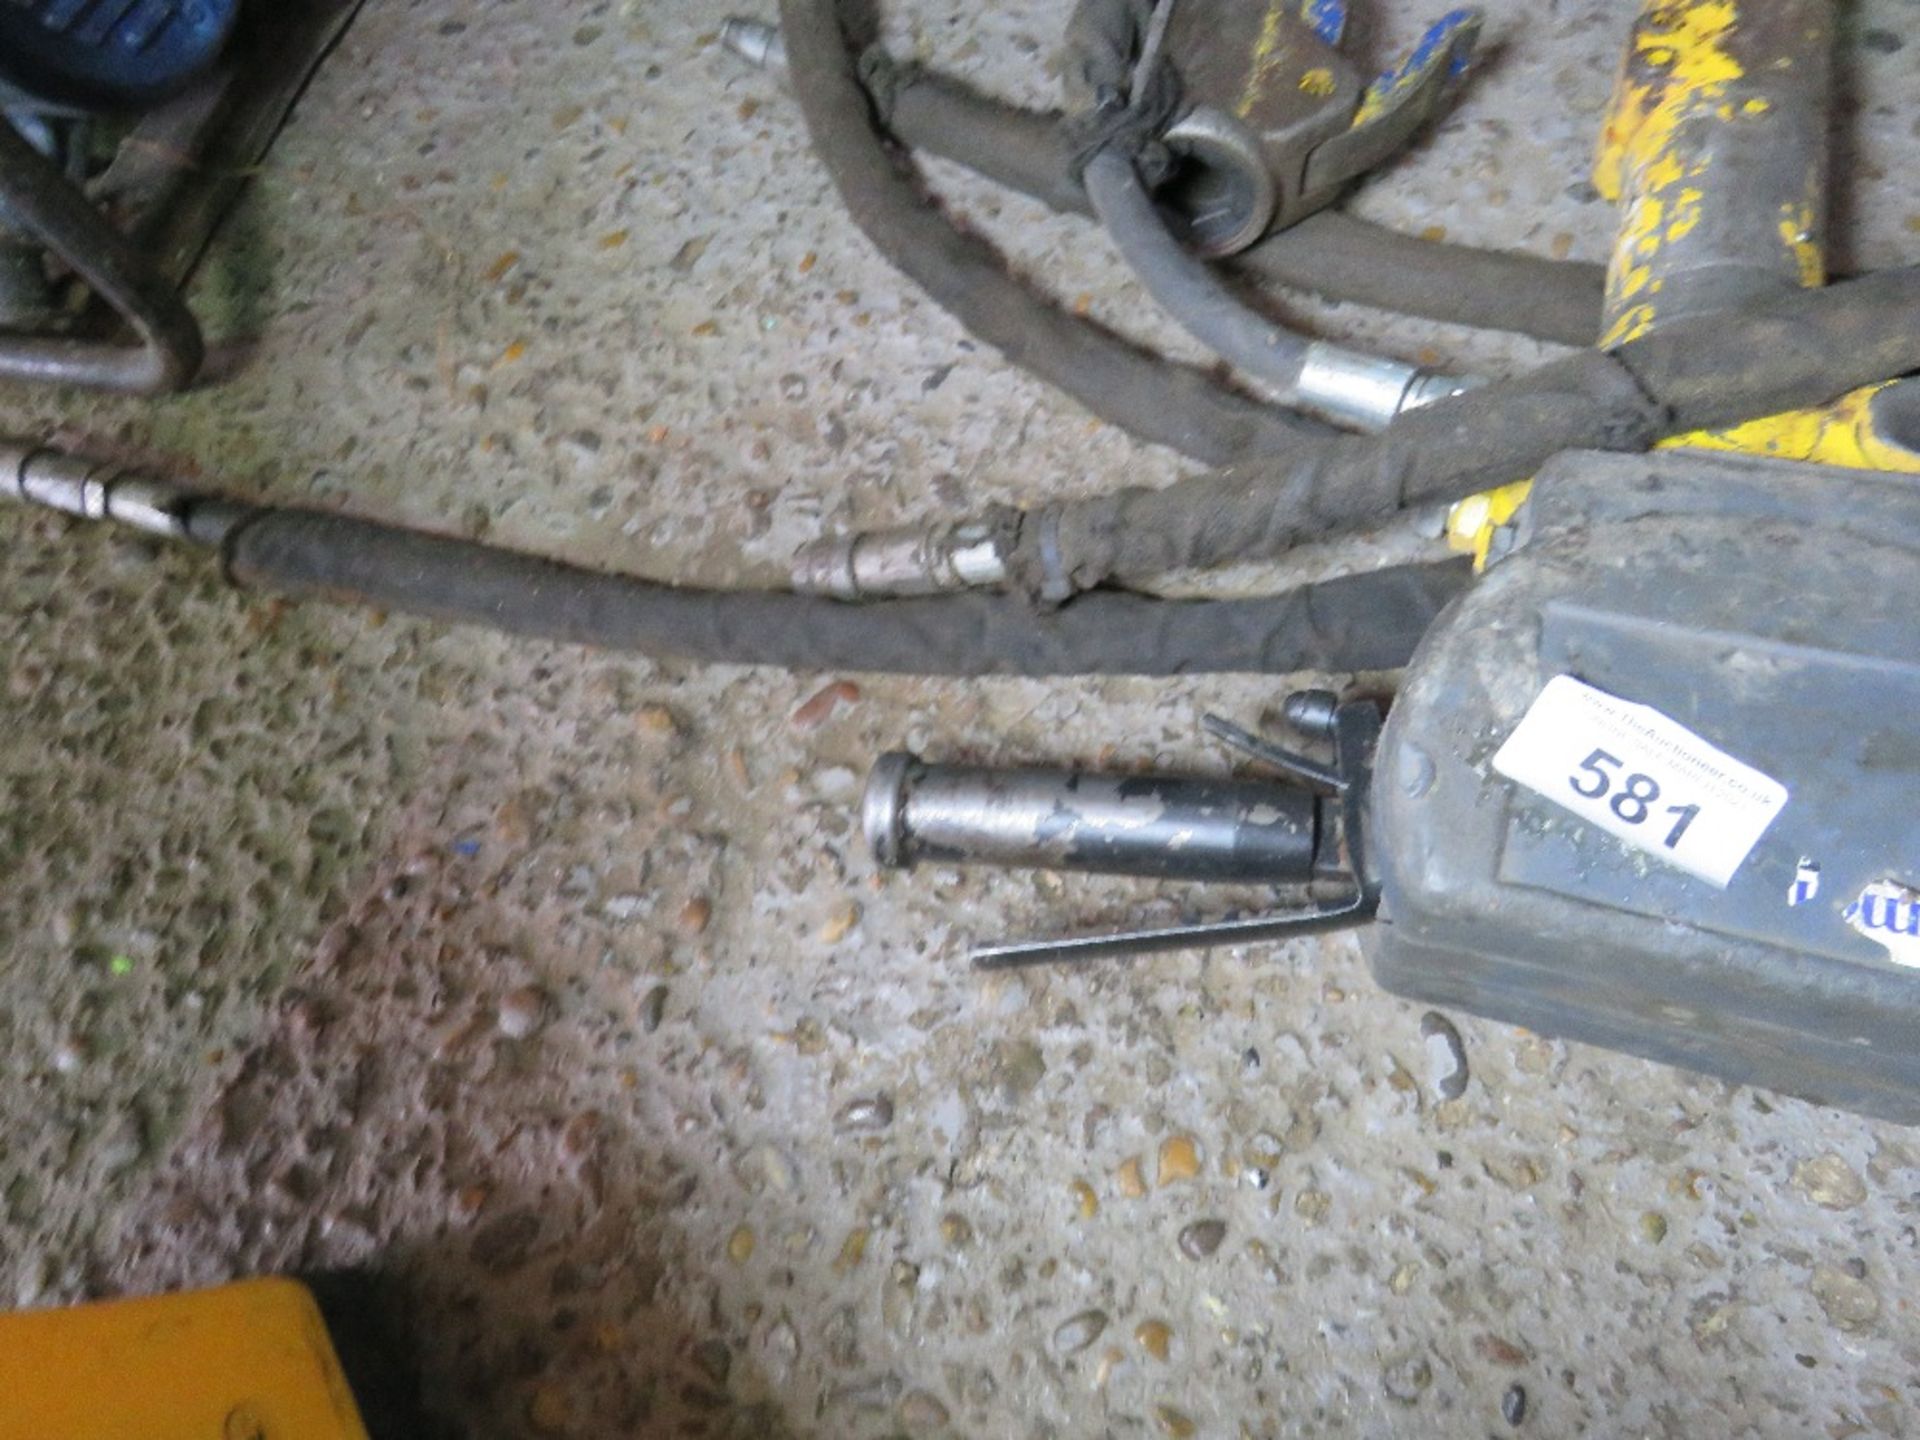 ATLAS COPCO HYDRAULIC BREAKER GUN. WAS WORKING WHEN RECENTLY REPLACED WITH JCB UNIT. - Image 2 of 2